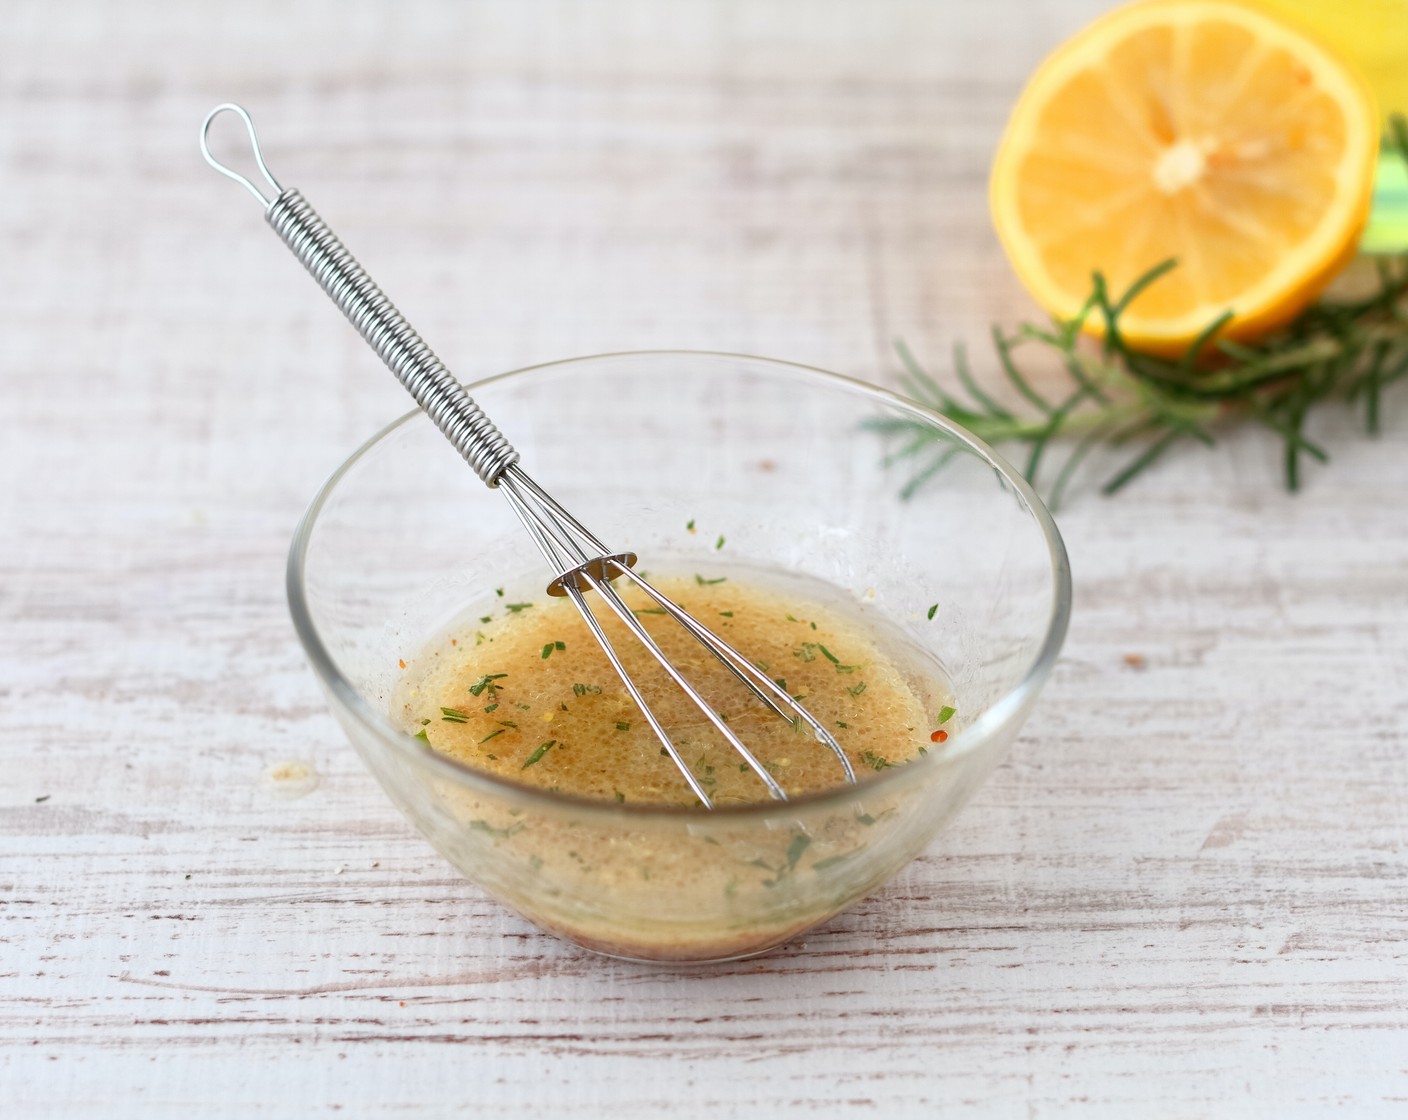 step 2 To make the dressing: Add Lemons (2), Sunkist Navel Orange (1), Dijon Mustard (1 Tbsp), Honey (2 Tbsp), and Extra-Virgin Olive Oil (1/3 cup) into a mason jar and shake. Season with Salt (to taste) and Ground Black Pepper (to taste).